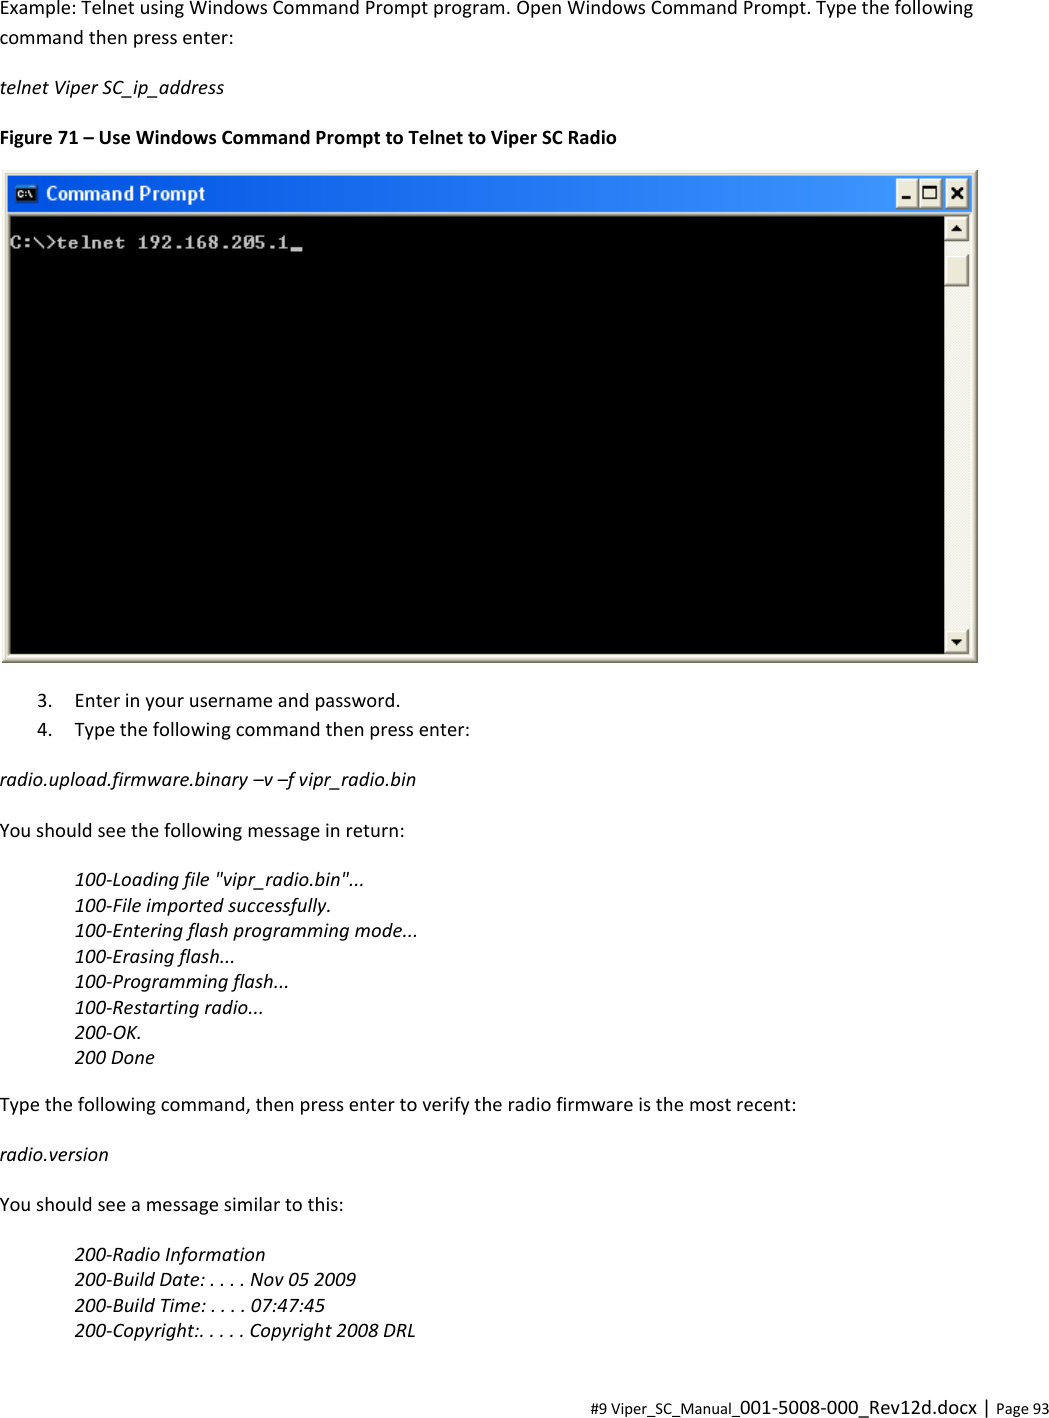  #9 Viper_SC_Manual_001-5008-000_Rev12d.docx | Page 93 Example: Telnet using Windows Command Prompt program. Open Windows Command Prompt. Type the following command then press enter: telnet Viper SC_ip_address Figure 71 – Use Windows Command Prompt to Telnet to Viper SC Radio  3. Enter in your username and password. 4. Type the following command then press enter: radio.upload.firmware.binary –v –f vipr_radio.bin You should see the following message in return: 100-Loading file &quot;vipr_radio.bin&quot;... 100-File imported successfully. 100-Entering flash programming mode... 100-Erasing flash... 100-Programming flash... 100-Restarting radio... 200-OK. 200 Done Type the following command, then press enter to verify the radio firmware is the most recent: radio.version You should see a message similar to this: 200-Radio Information 200-Build Date: . . . . Nov 05 2009 200-Build Time: . . . . 07:47:45 200-Copyright:. . . . . Copyright 2008 DRL 